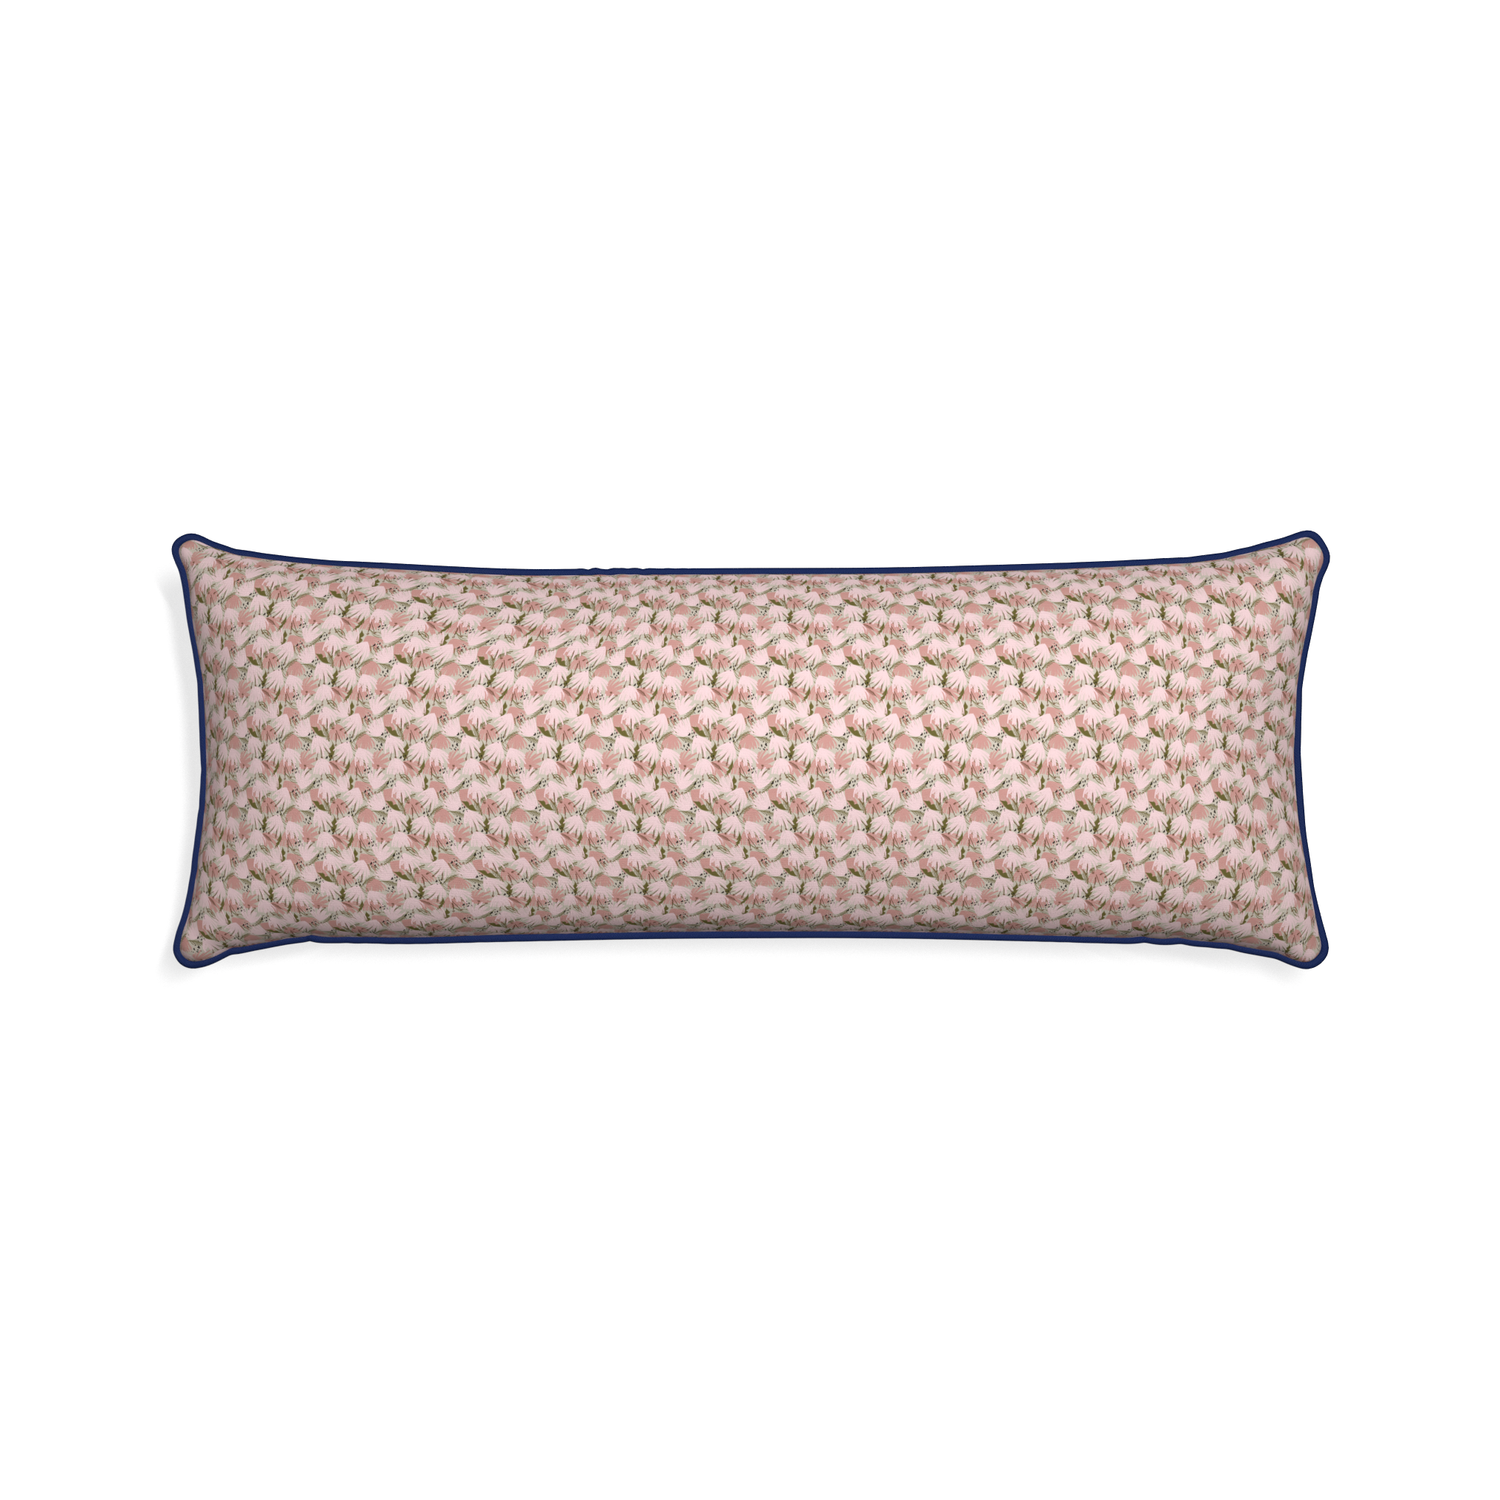 Xl-lumbar eden pink custom pink floralpillow with midnight piping on white background